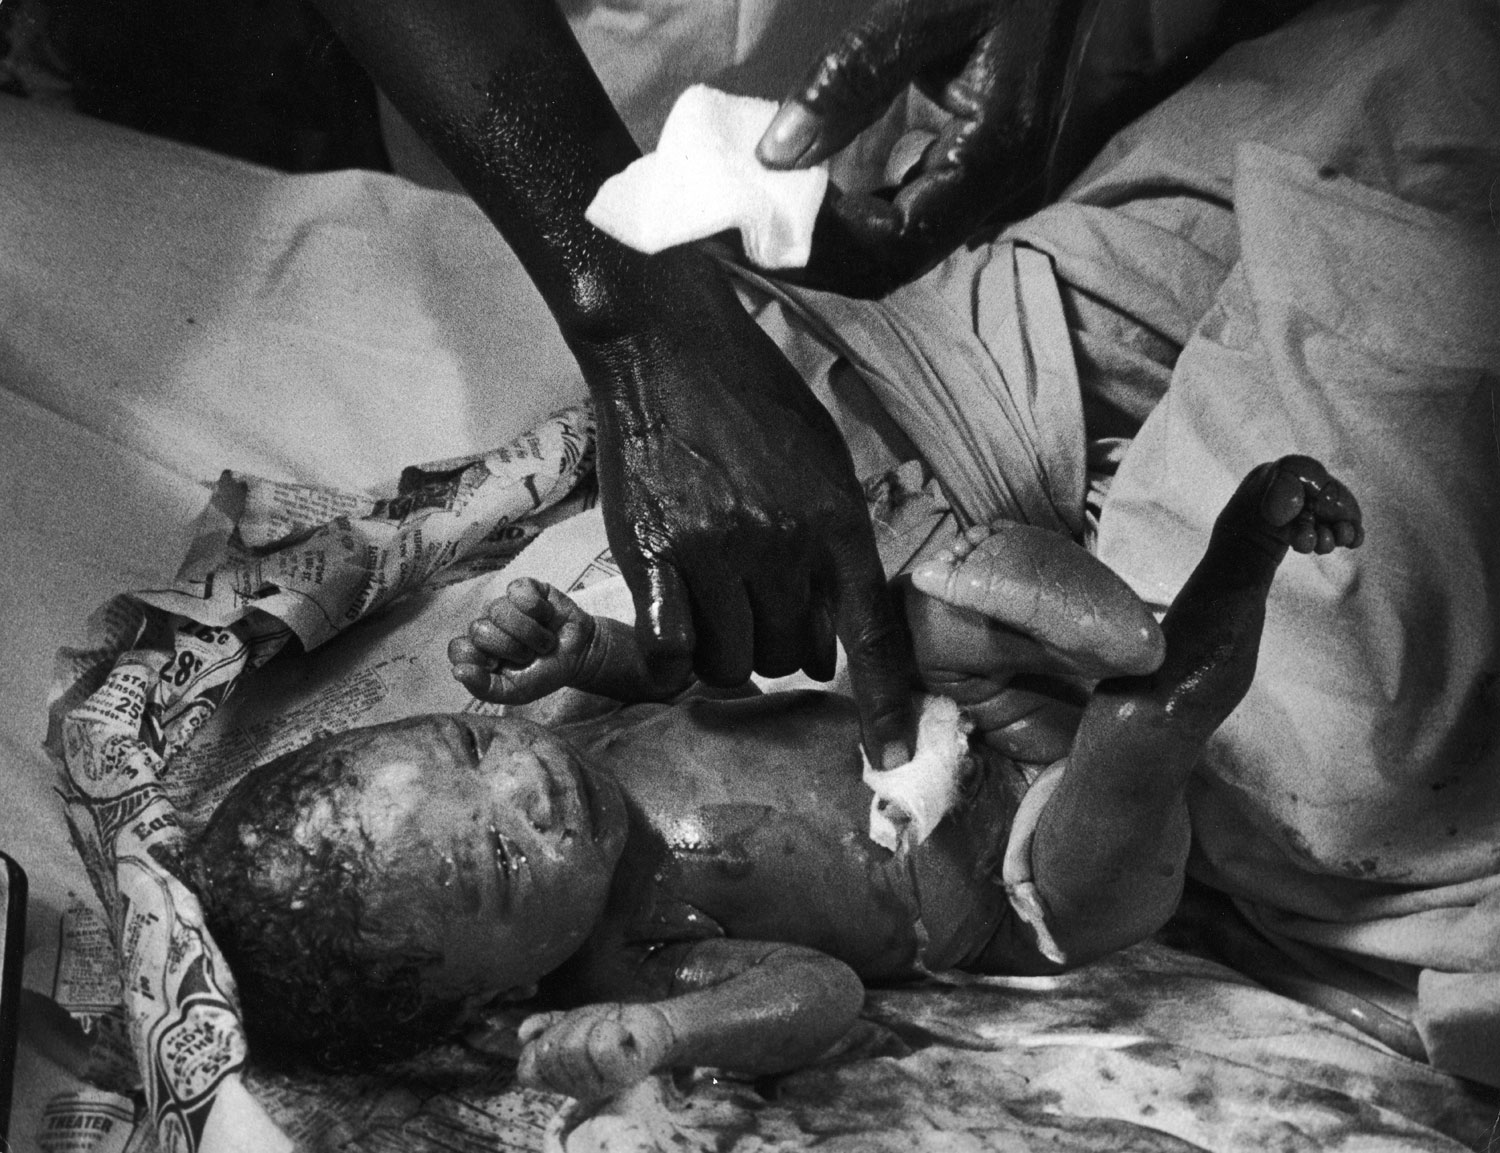 Not published in LIFE. Newborn delivered by nurse midwife Maude Callen, South Carolina, 1951.